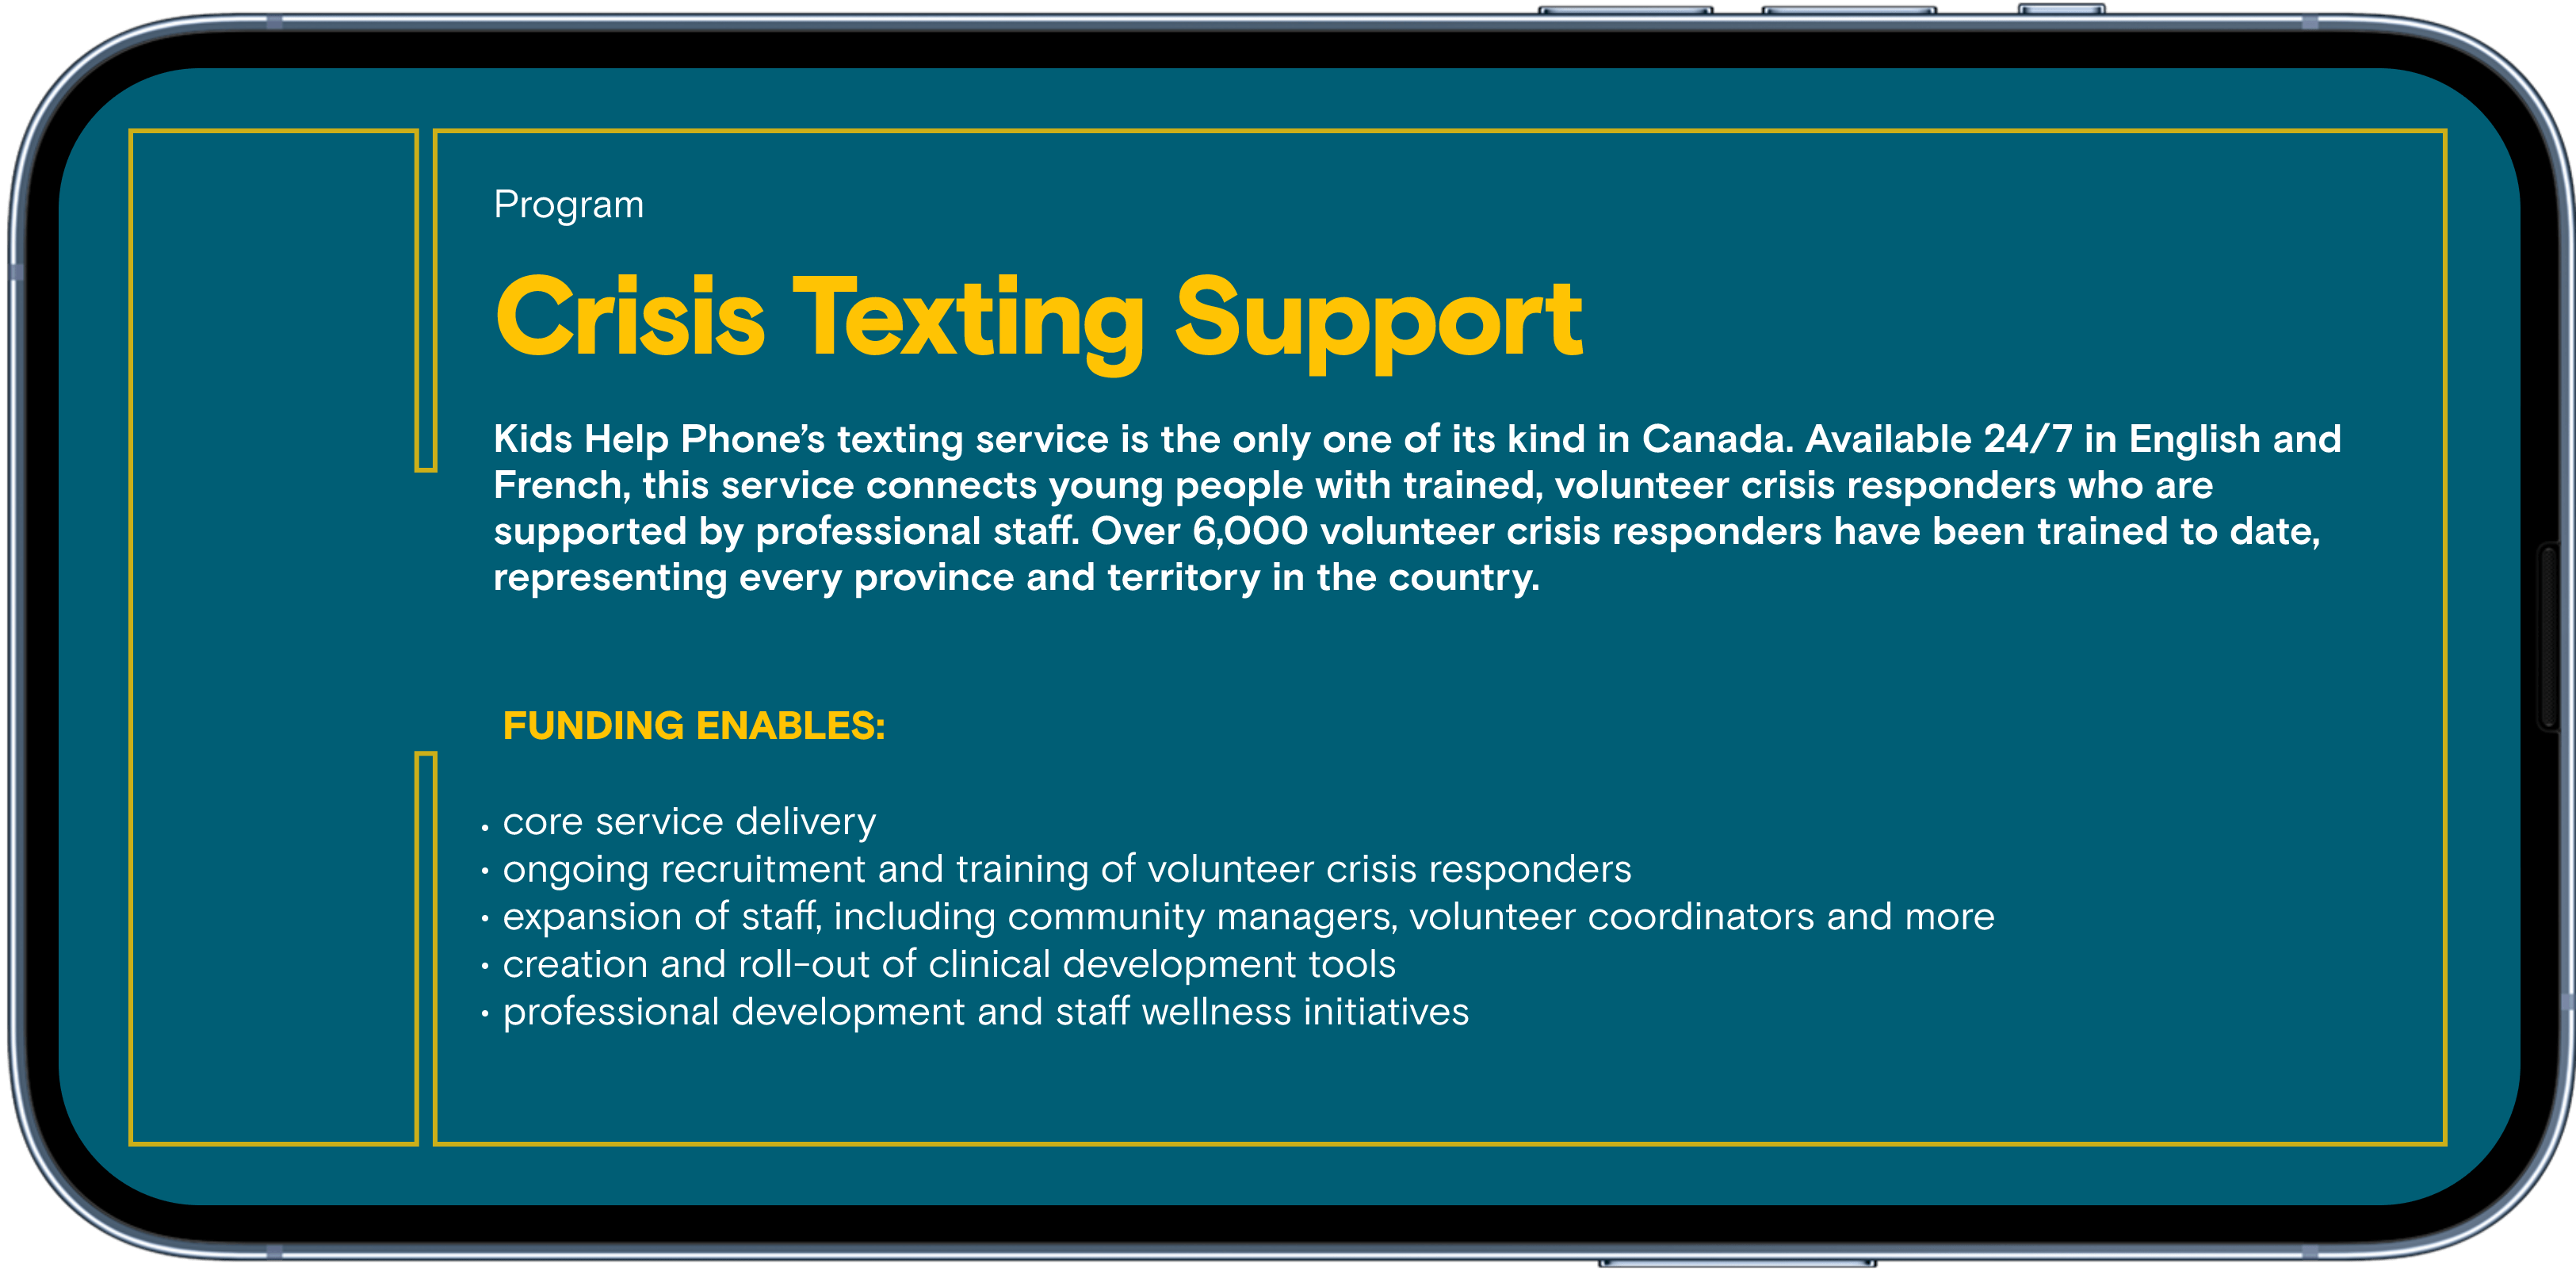 Crisis texting support information inside phone